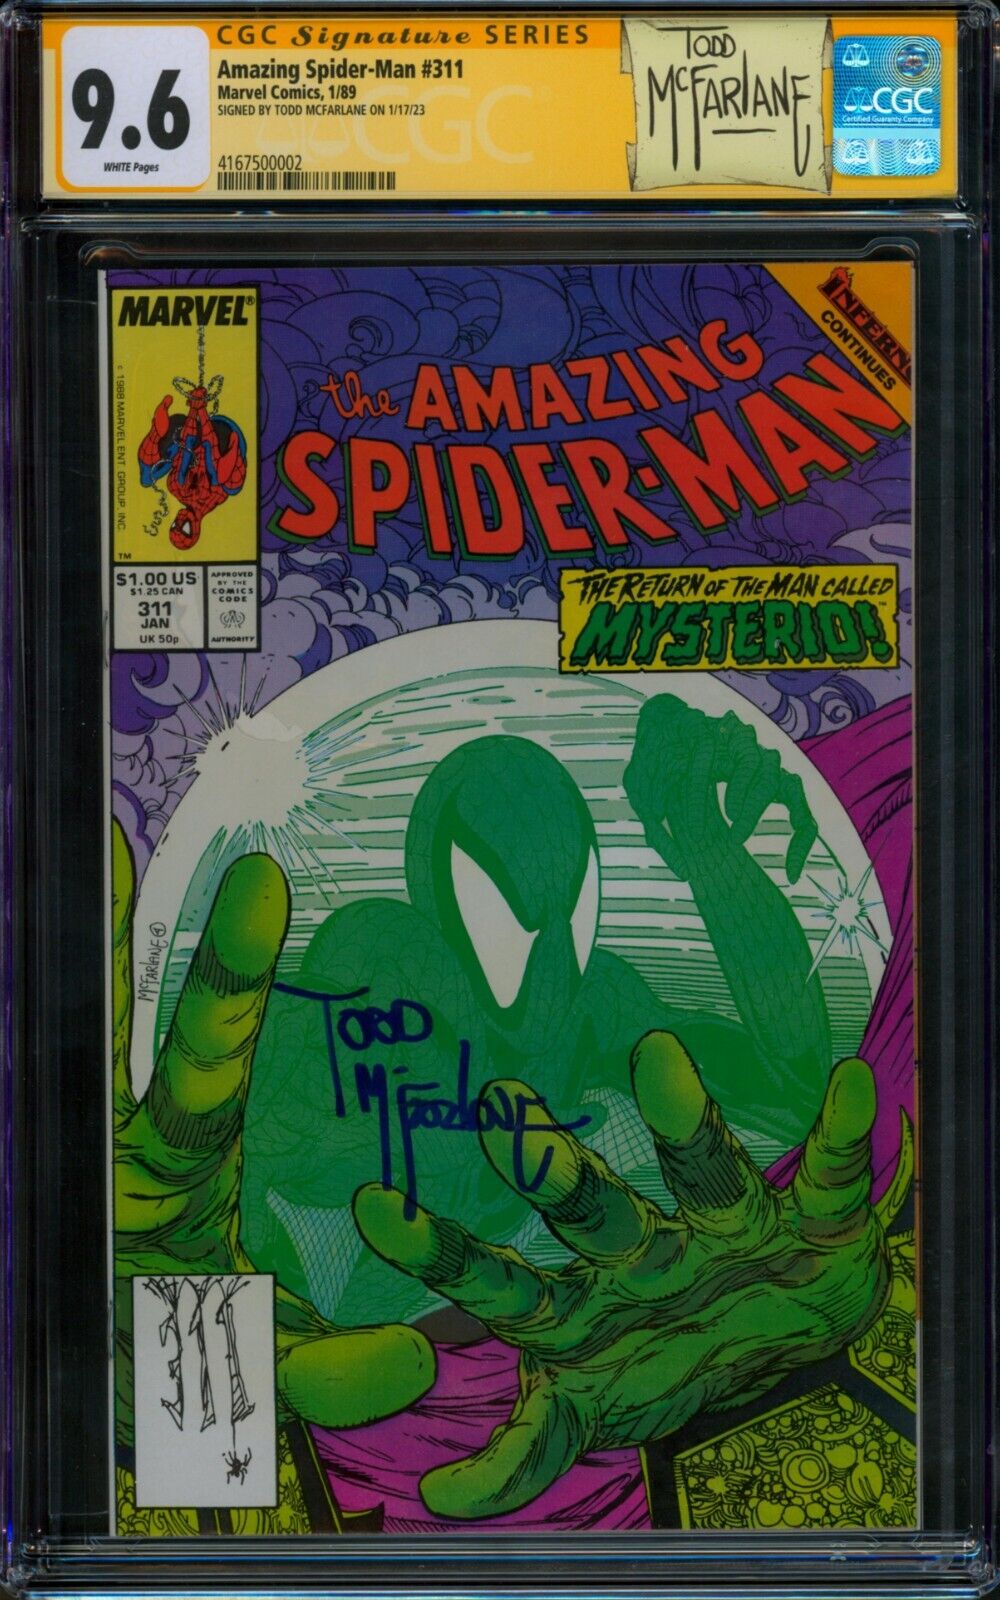 Amazing Spider-Man #311 🌟 CGC 9.6 SS SIGNED by TODD MCFARLANE 🌟 Mysterio 1989